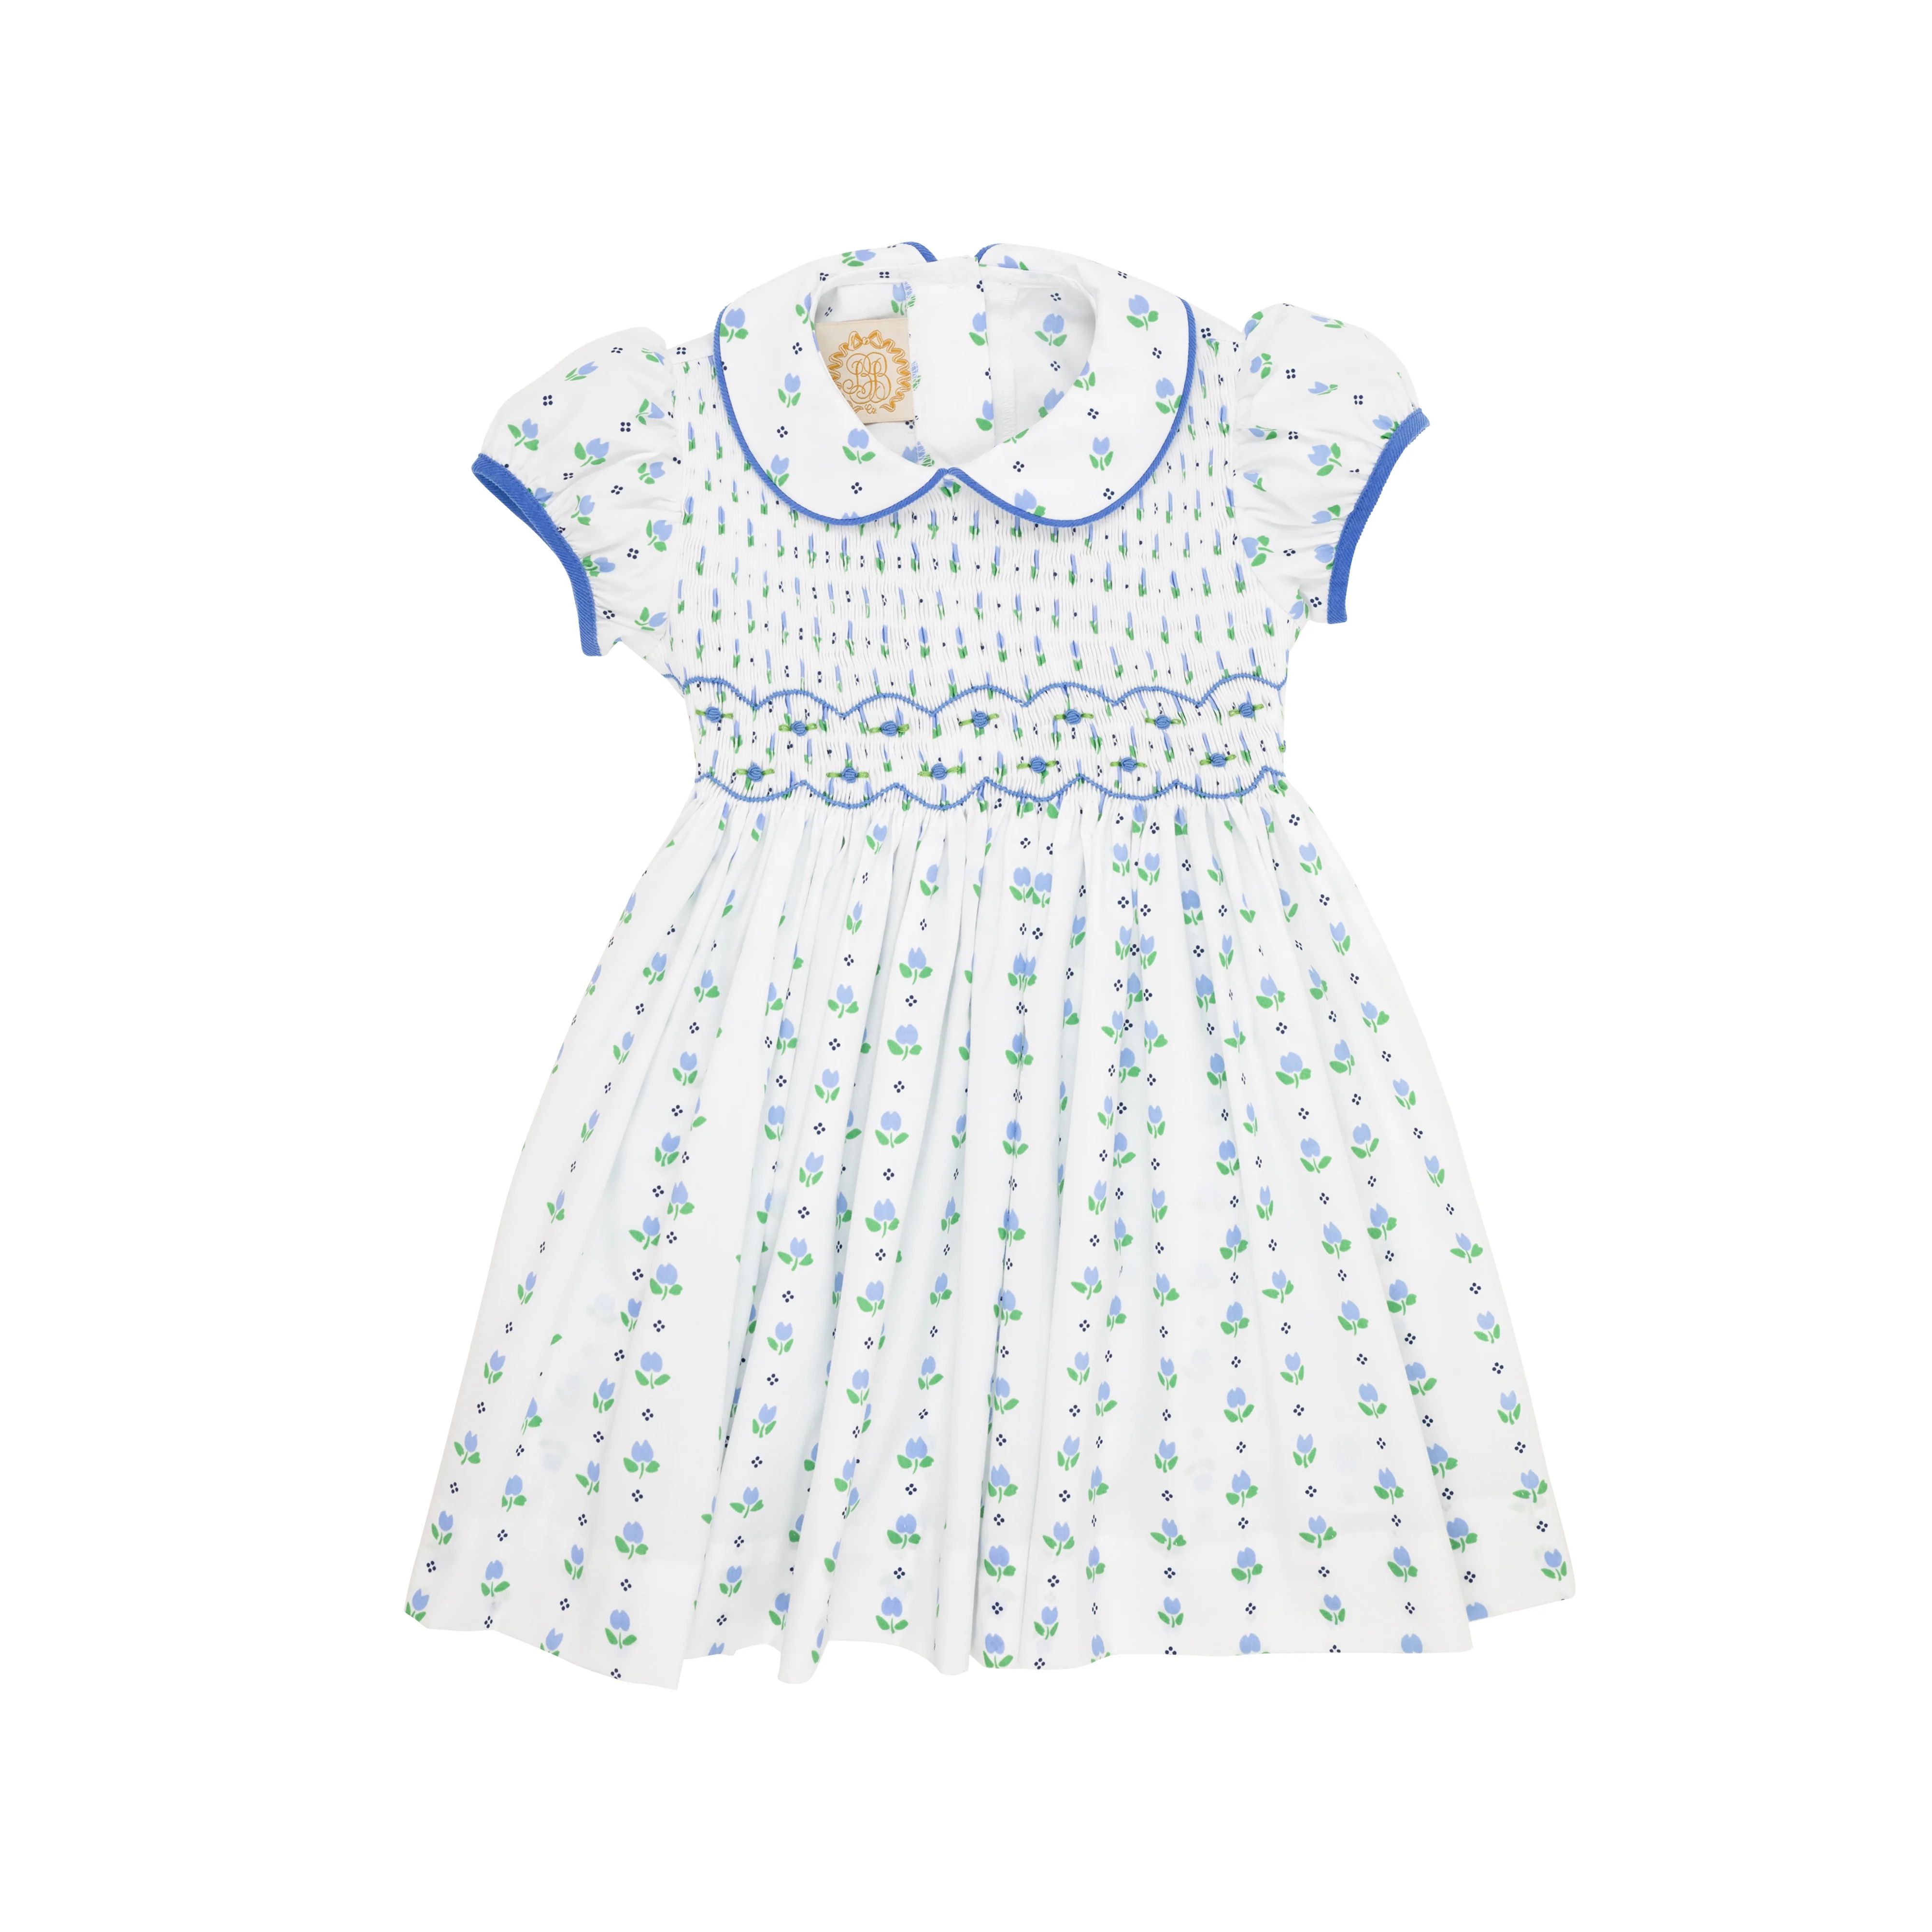 Smocked Mary Dal Dress - Georgetown Tulip with Barbados Blue | The Beaufort Bonnet Company